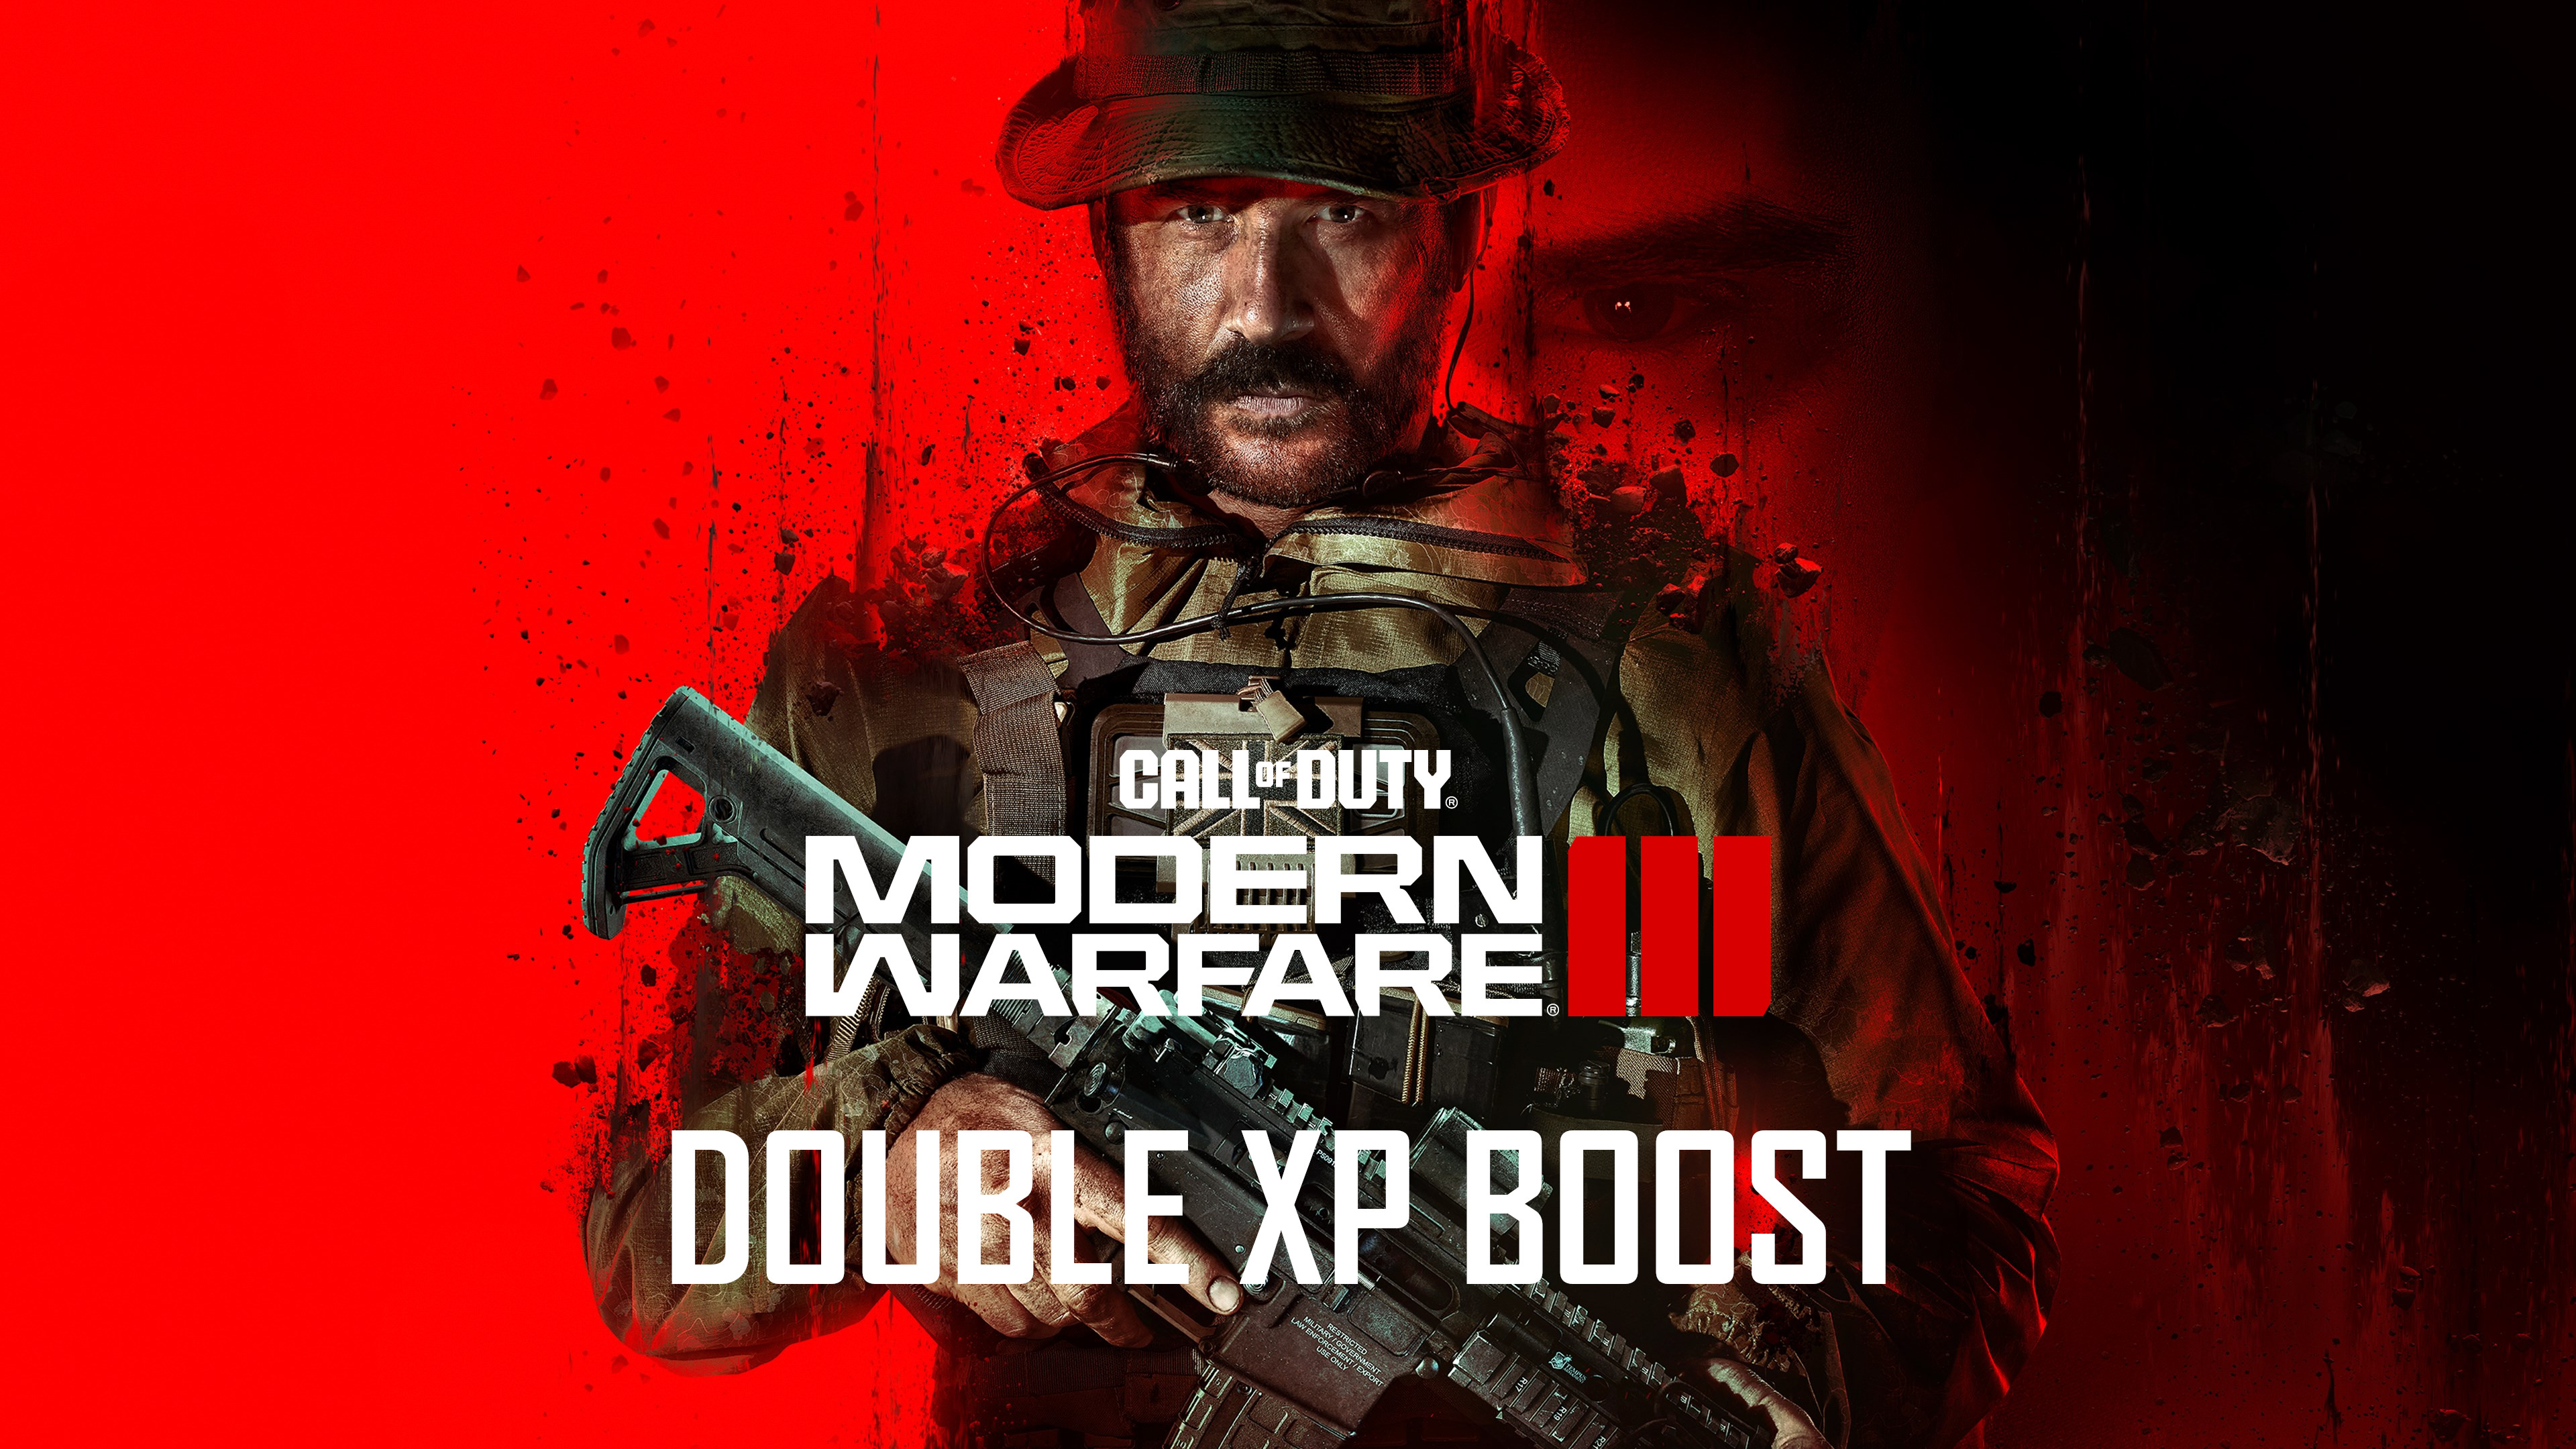 Call of Duty: Modern Warfare III - 5 Hours Double XP Boost PC/PS4/PS5/XBOX One/Series X|S CD Key, 4.52$